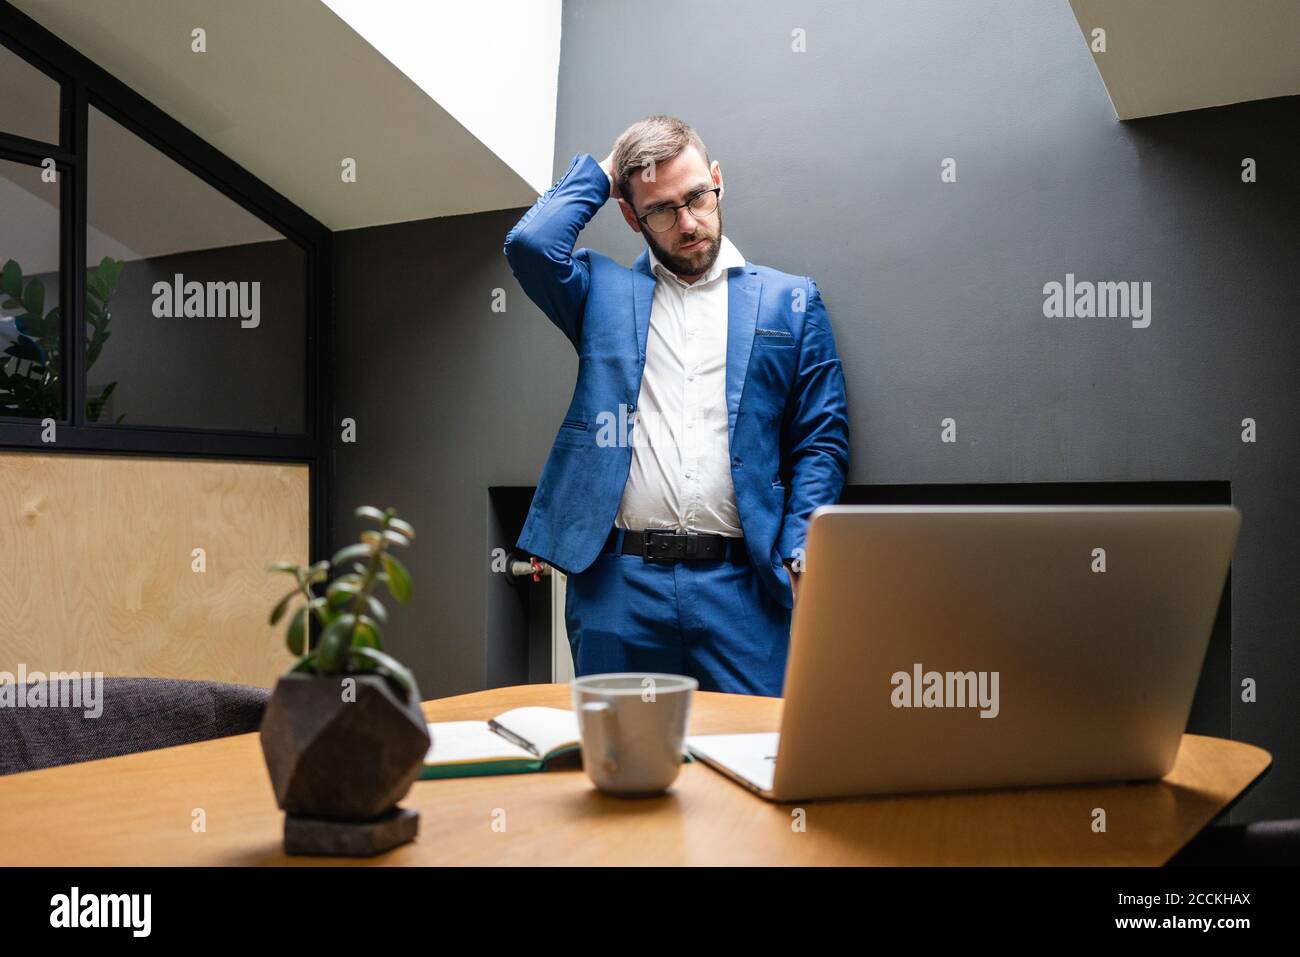 Confused businessman scratching head while looking at laptop on desk in creative office Stock Photo